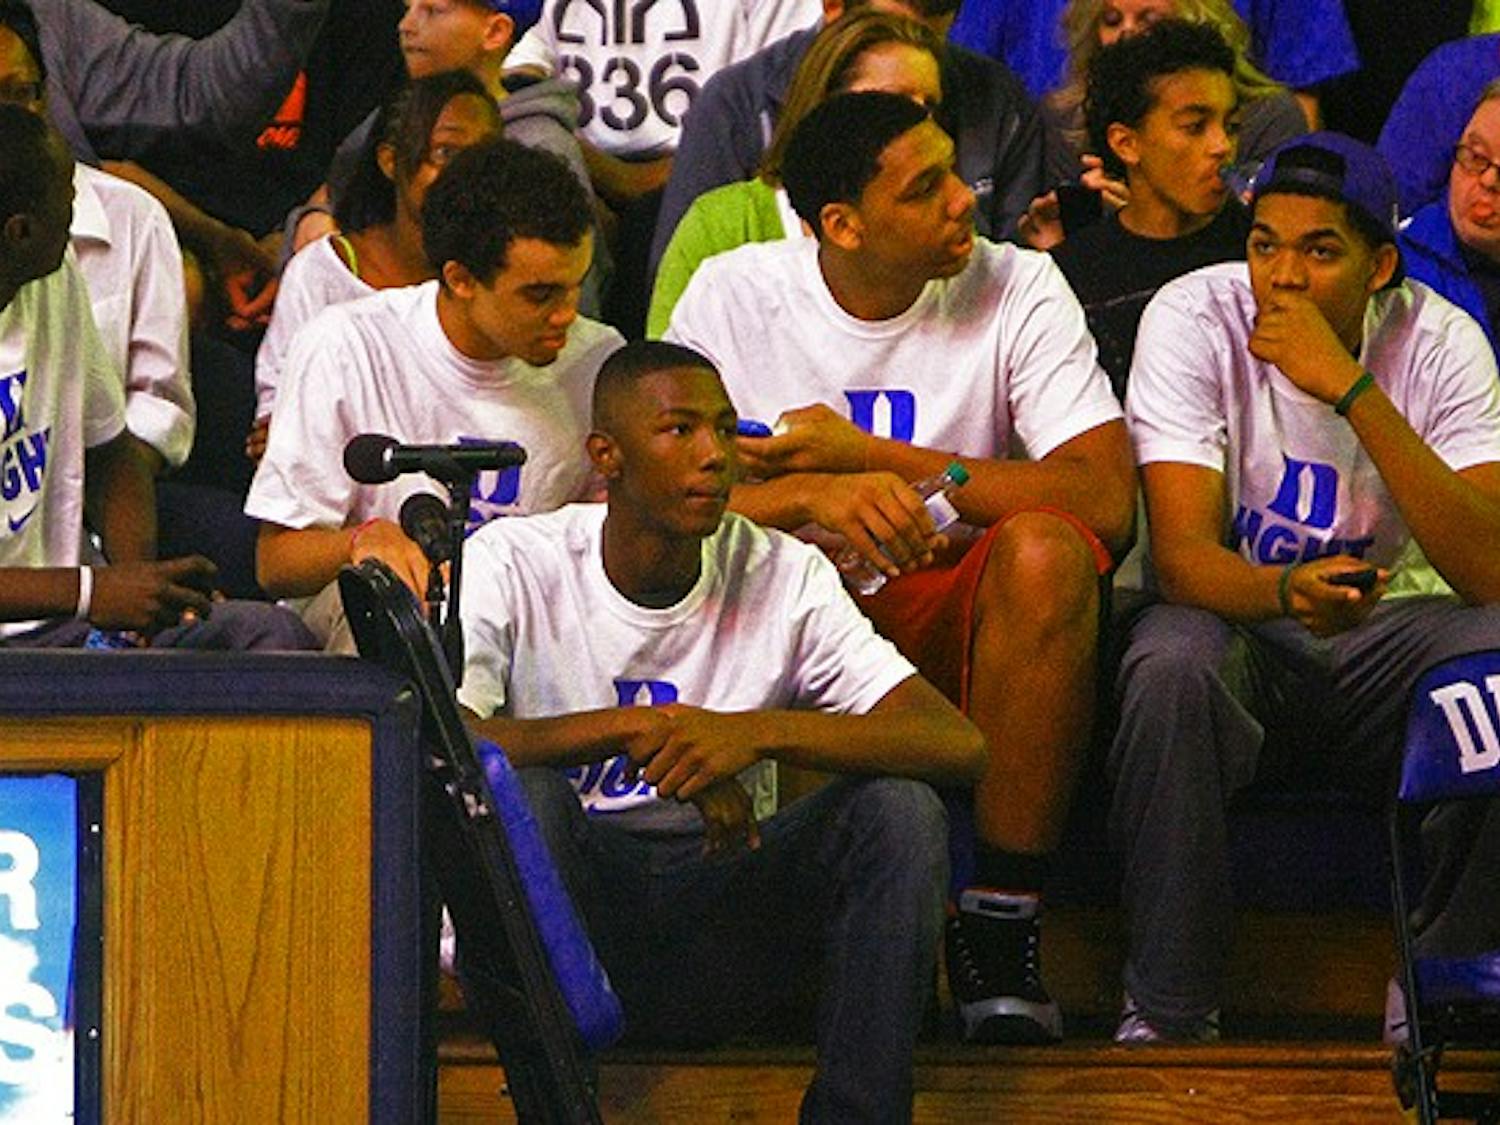 Top recruits sit behind Duke’s bench during Countdown to Craziness. Brady Buck covered recruiting for The Chronicle.